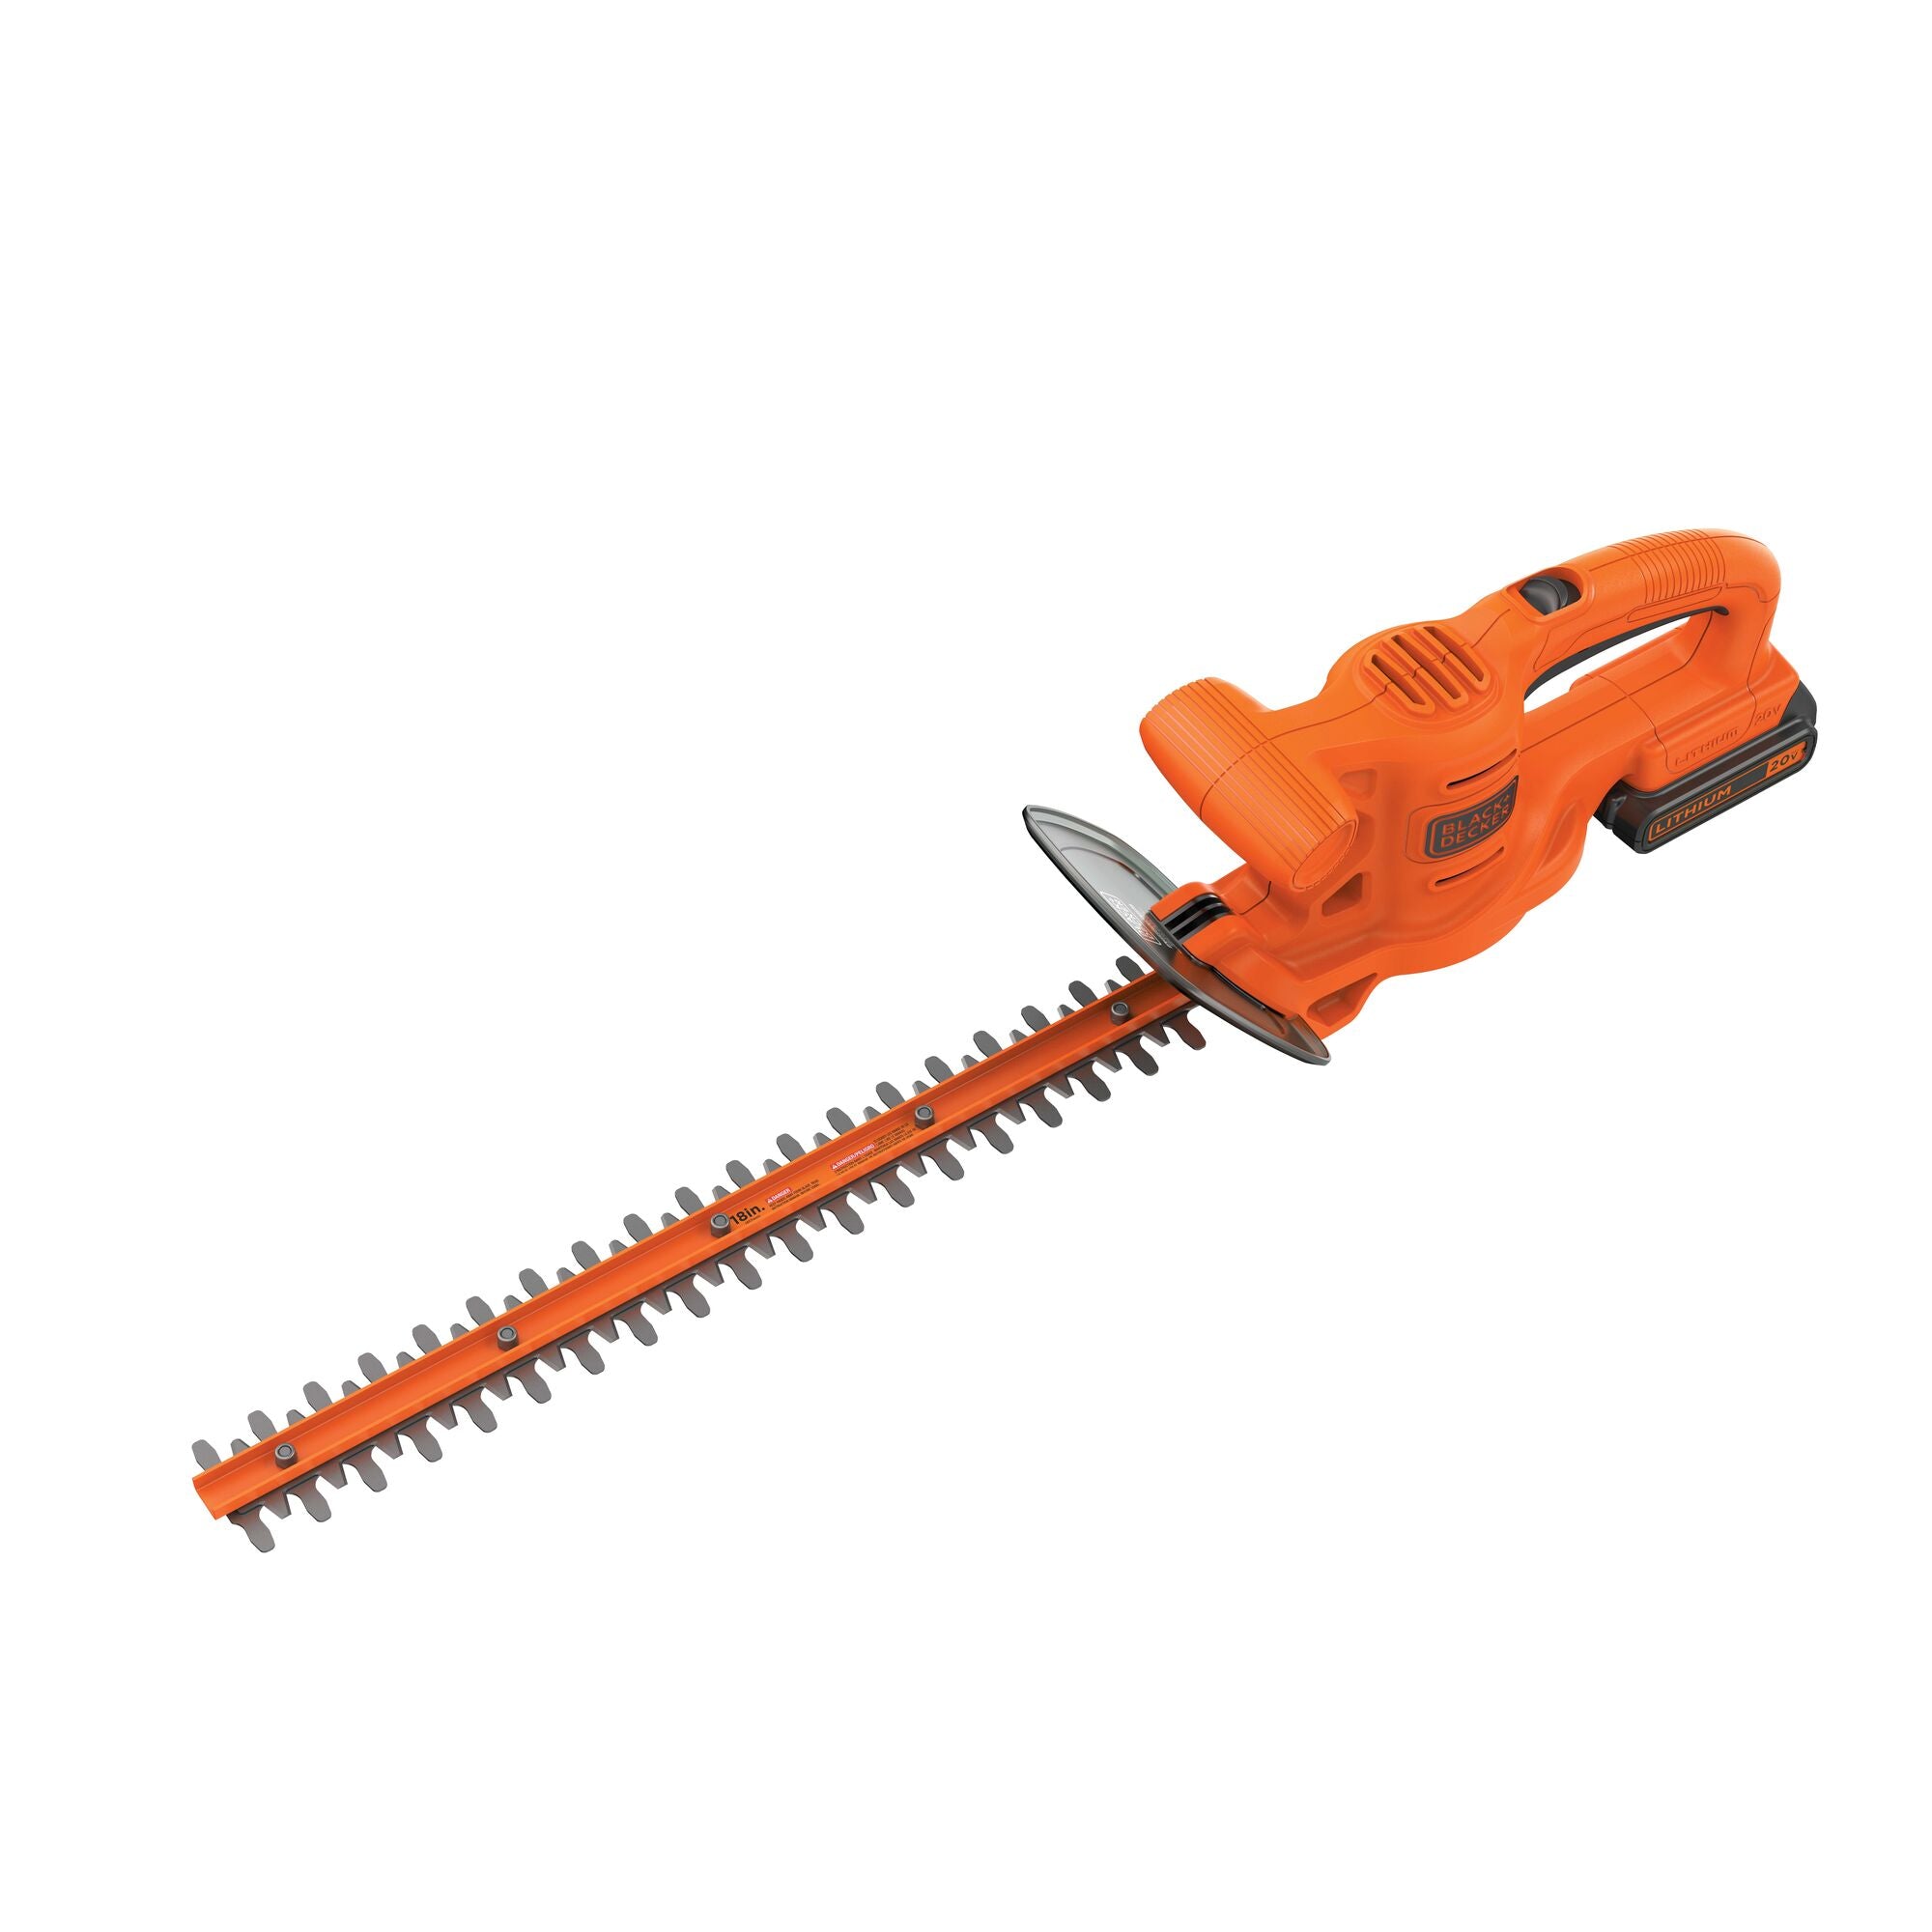 A person holds the BLACK+DECKER 20V MAX* Cordless Hedge Trimmer with both hands.